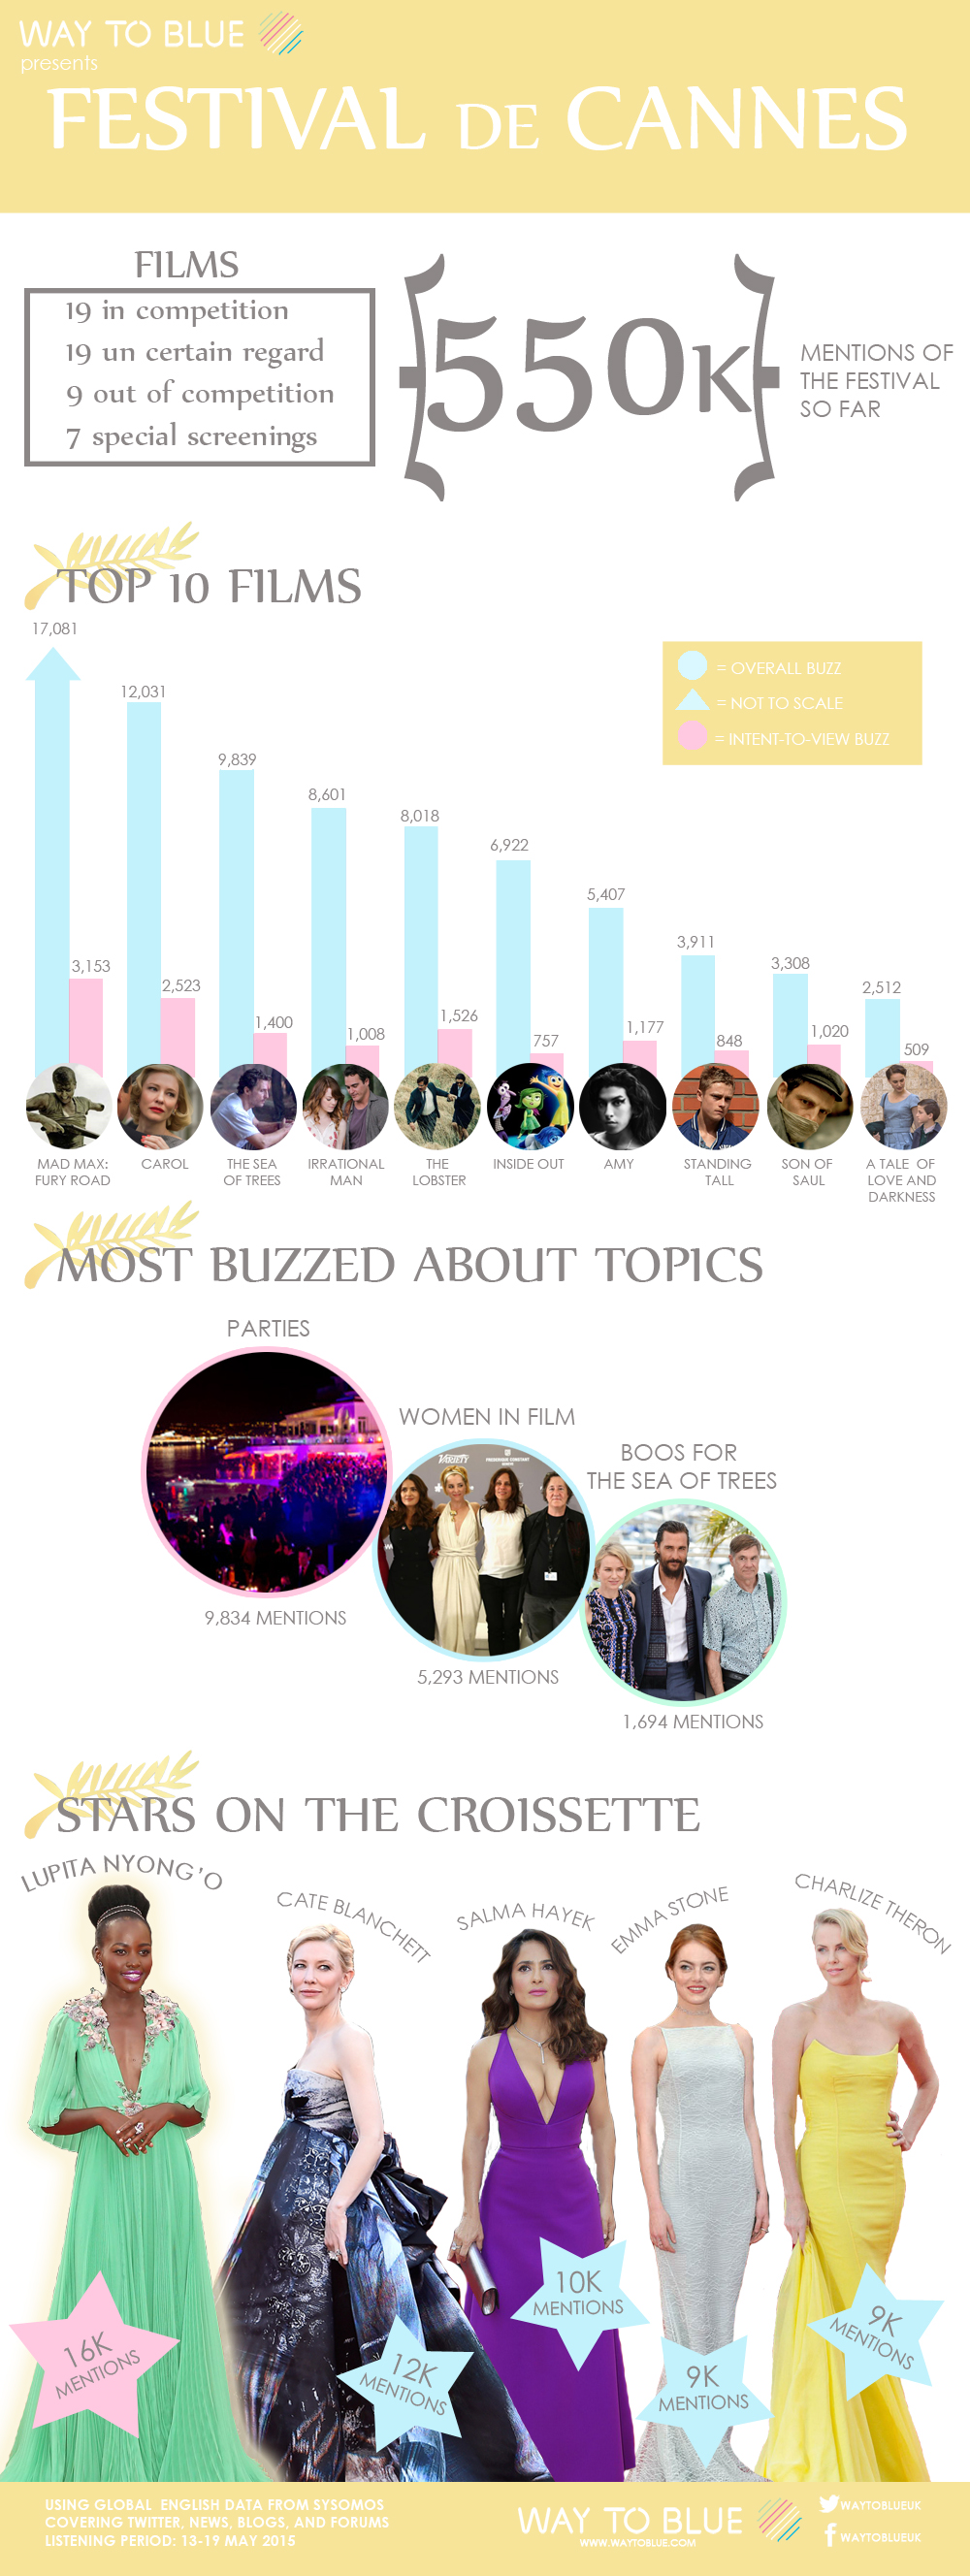 WTB Cannes Mid-Week infographic